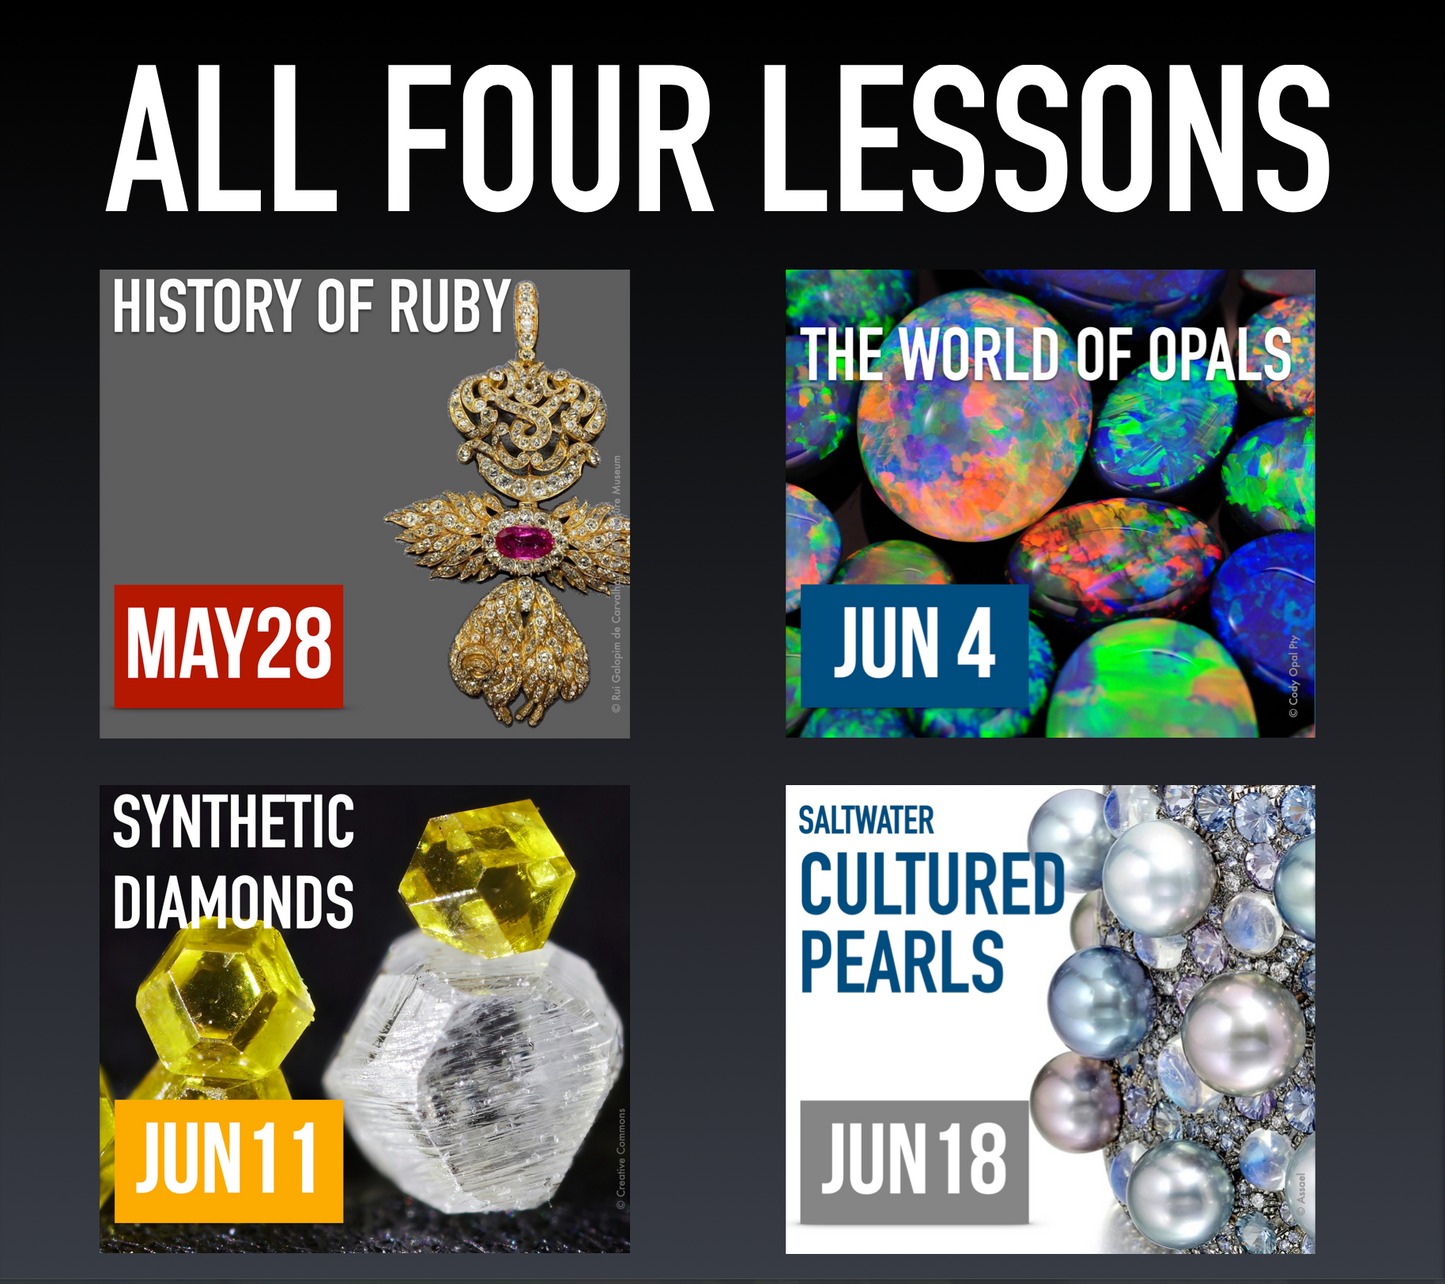 ALL FOUR LESSONS